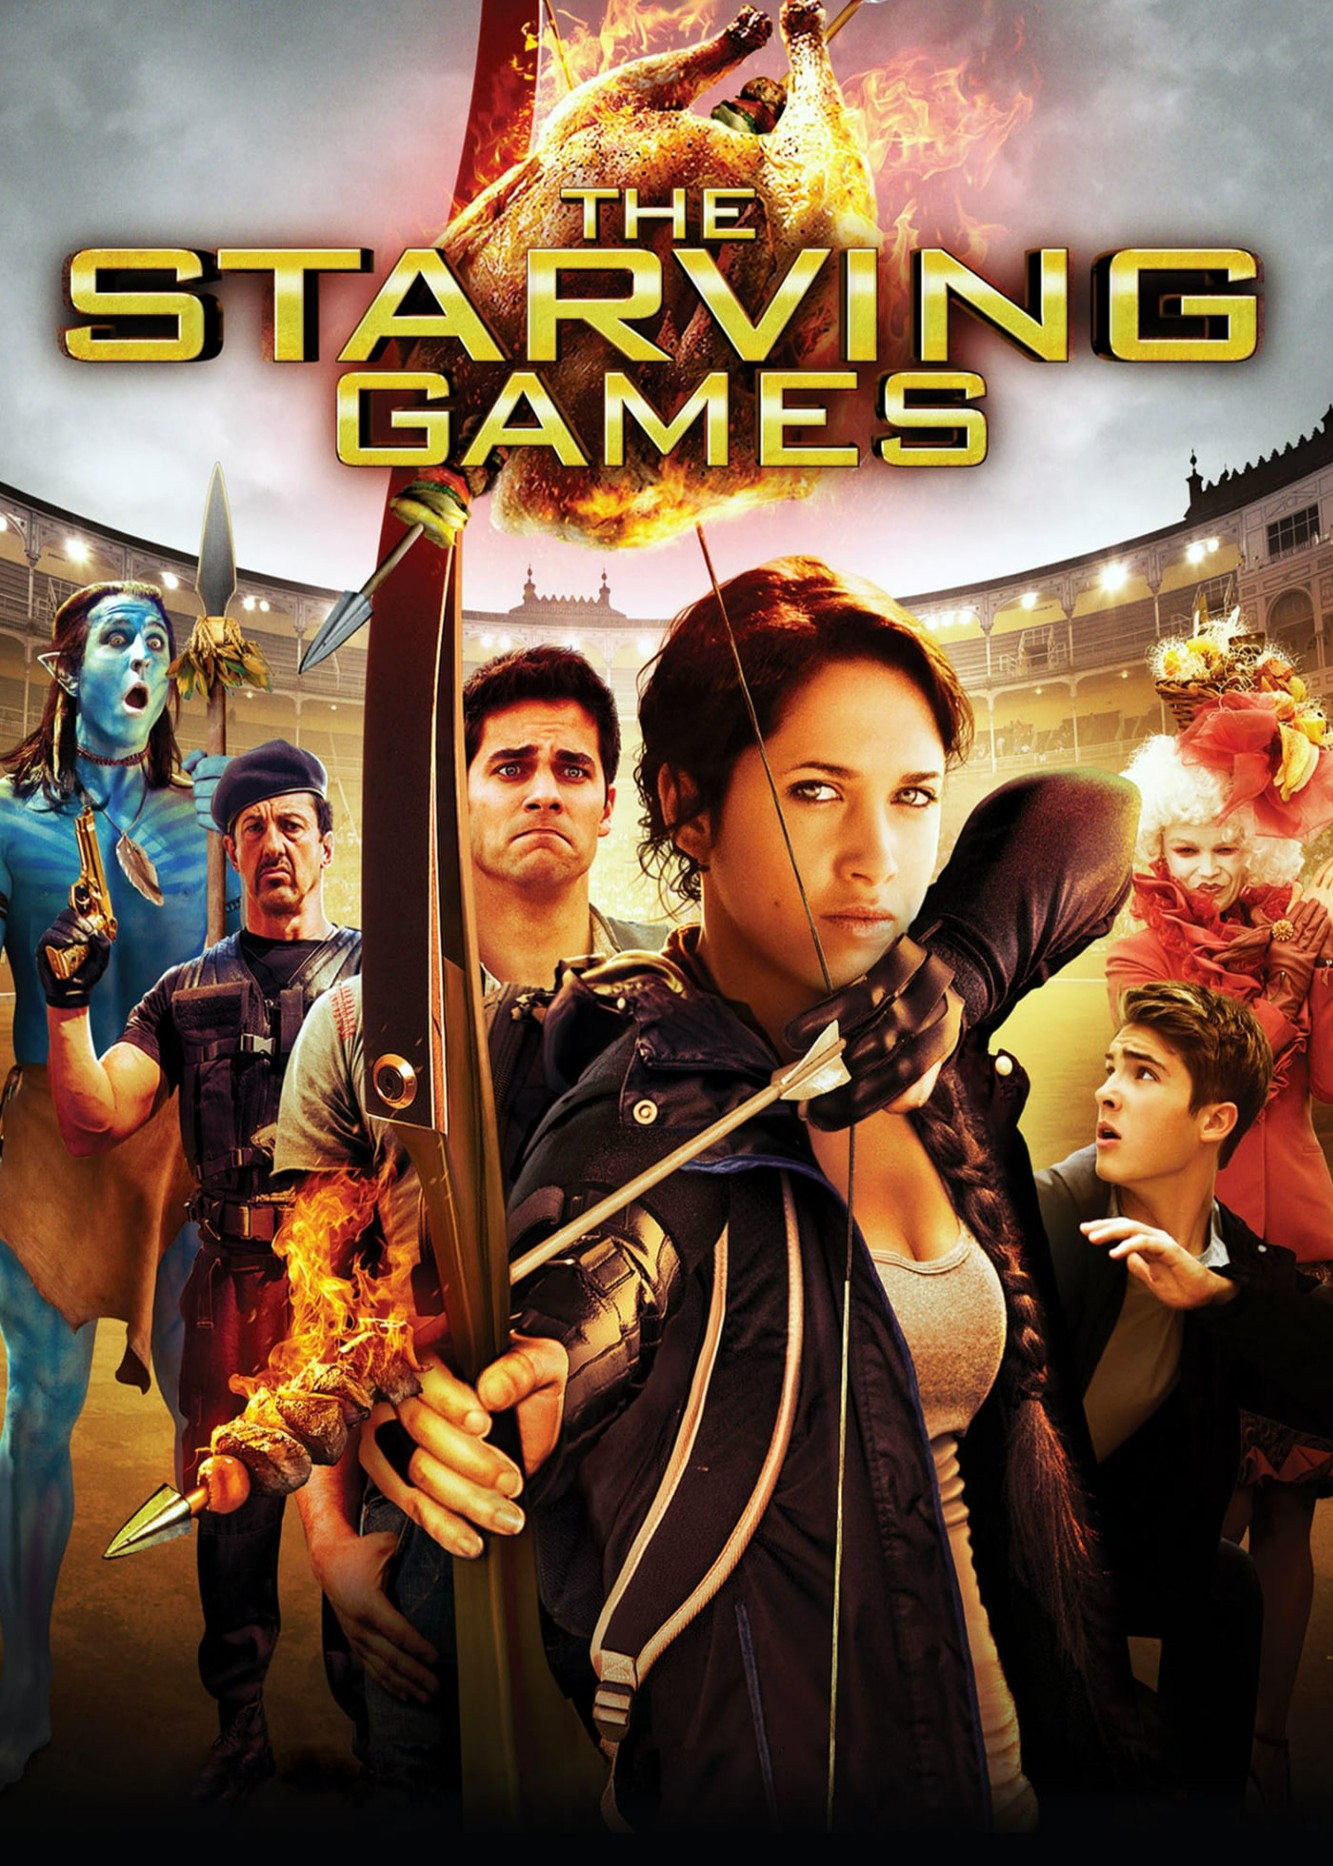 The Starving Games - The Starving Games